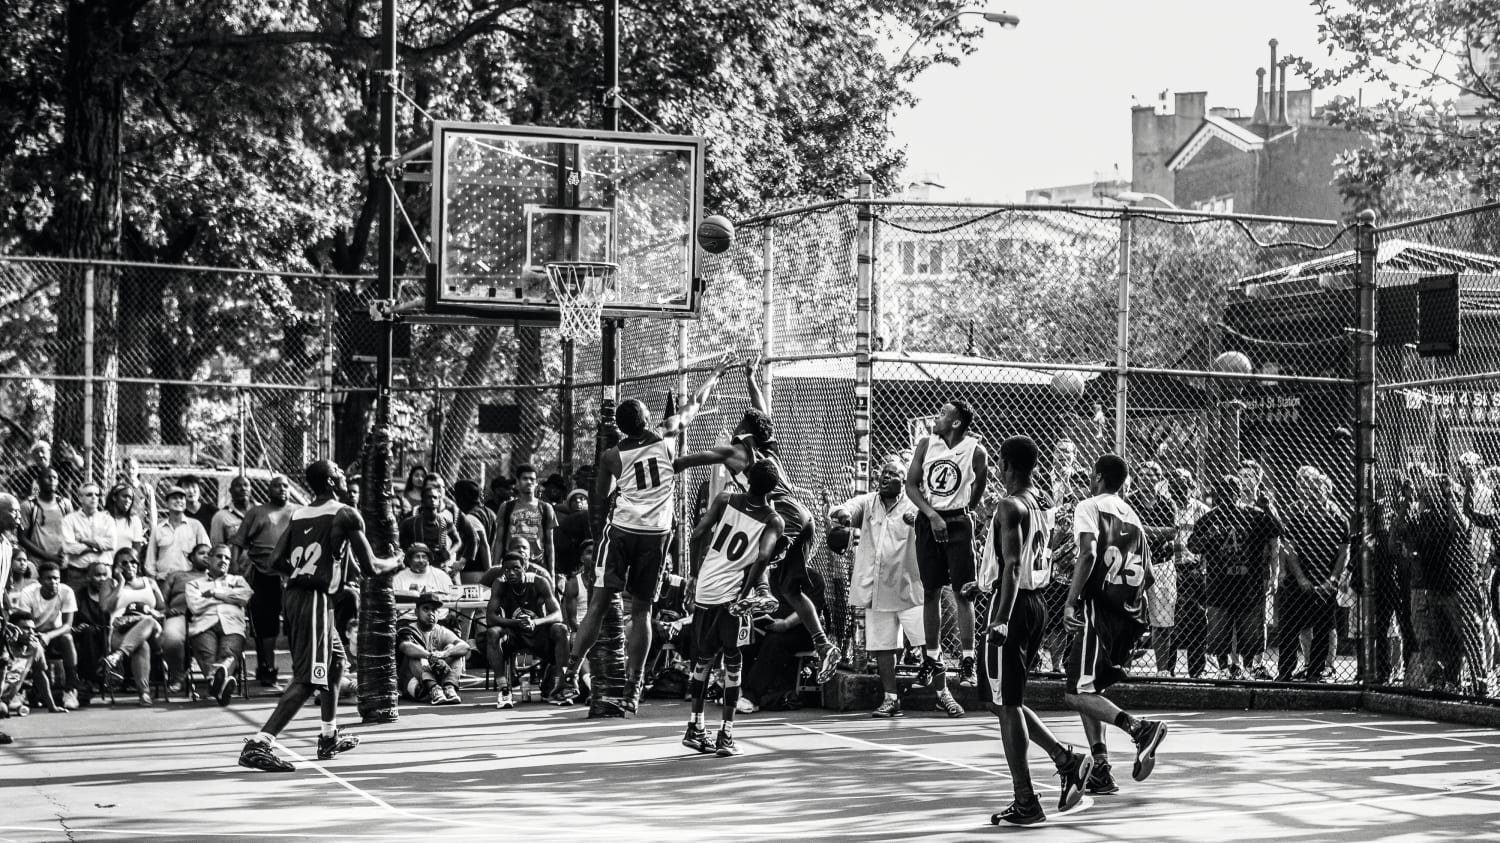 The Cage: New York's iconic West Basketball court